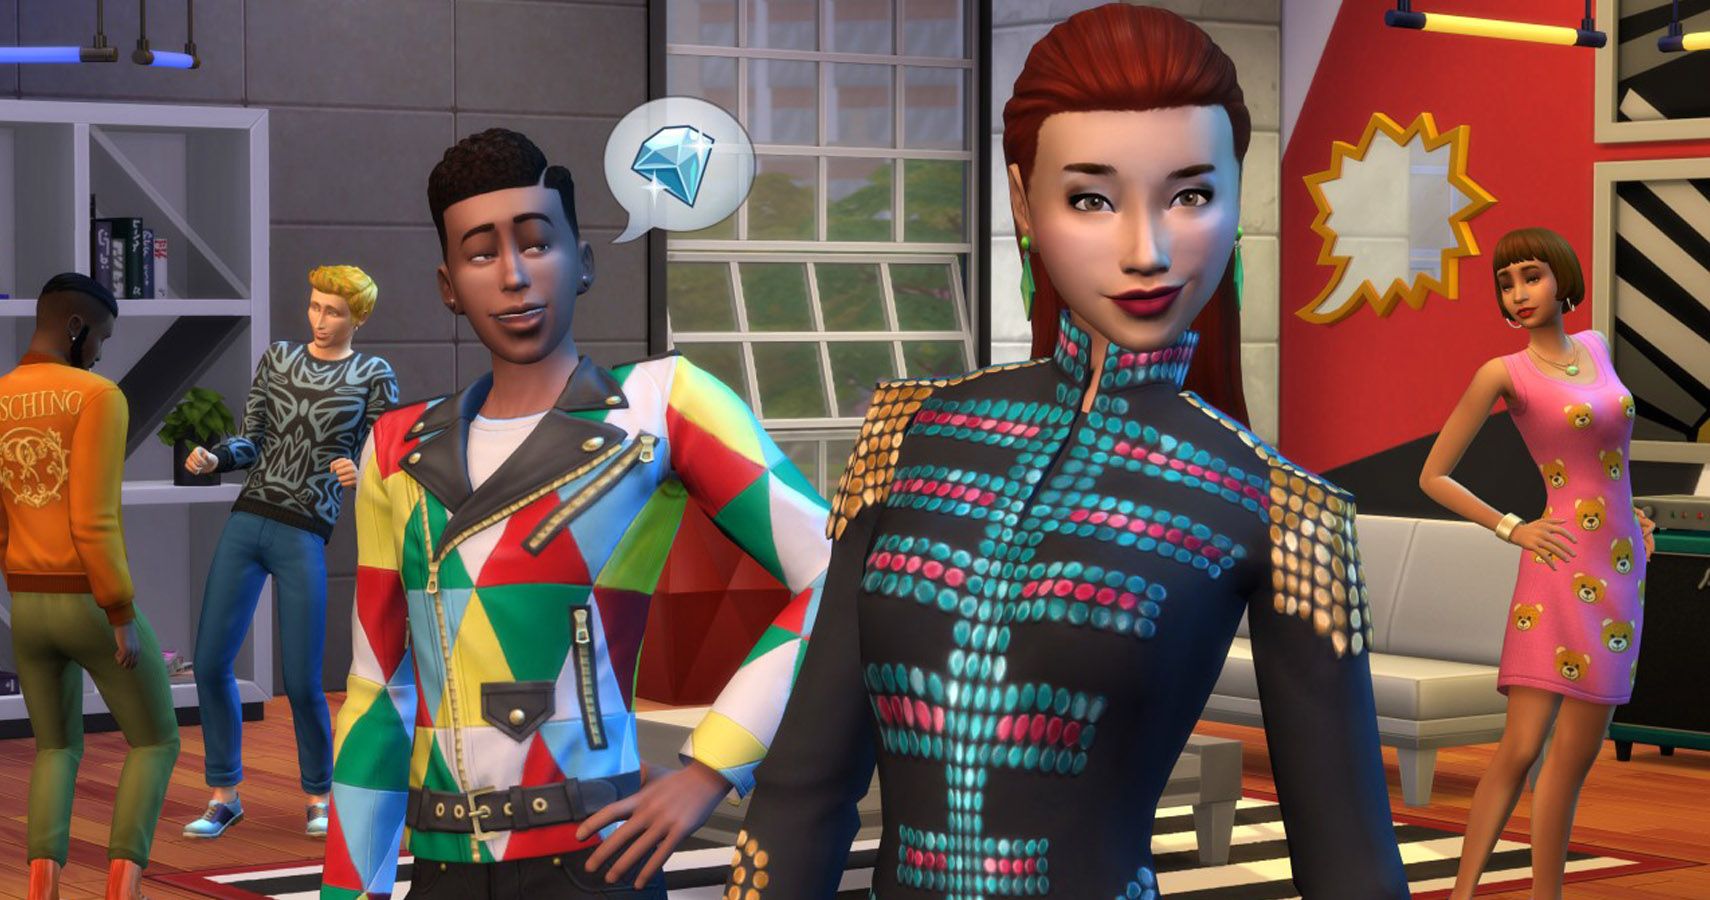 Sims in moschino clothing.